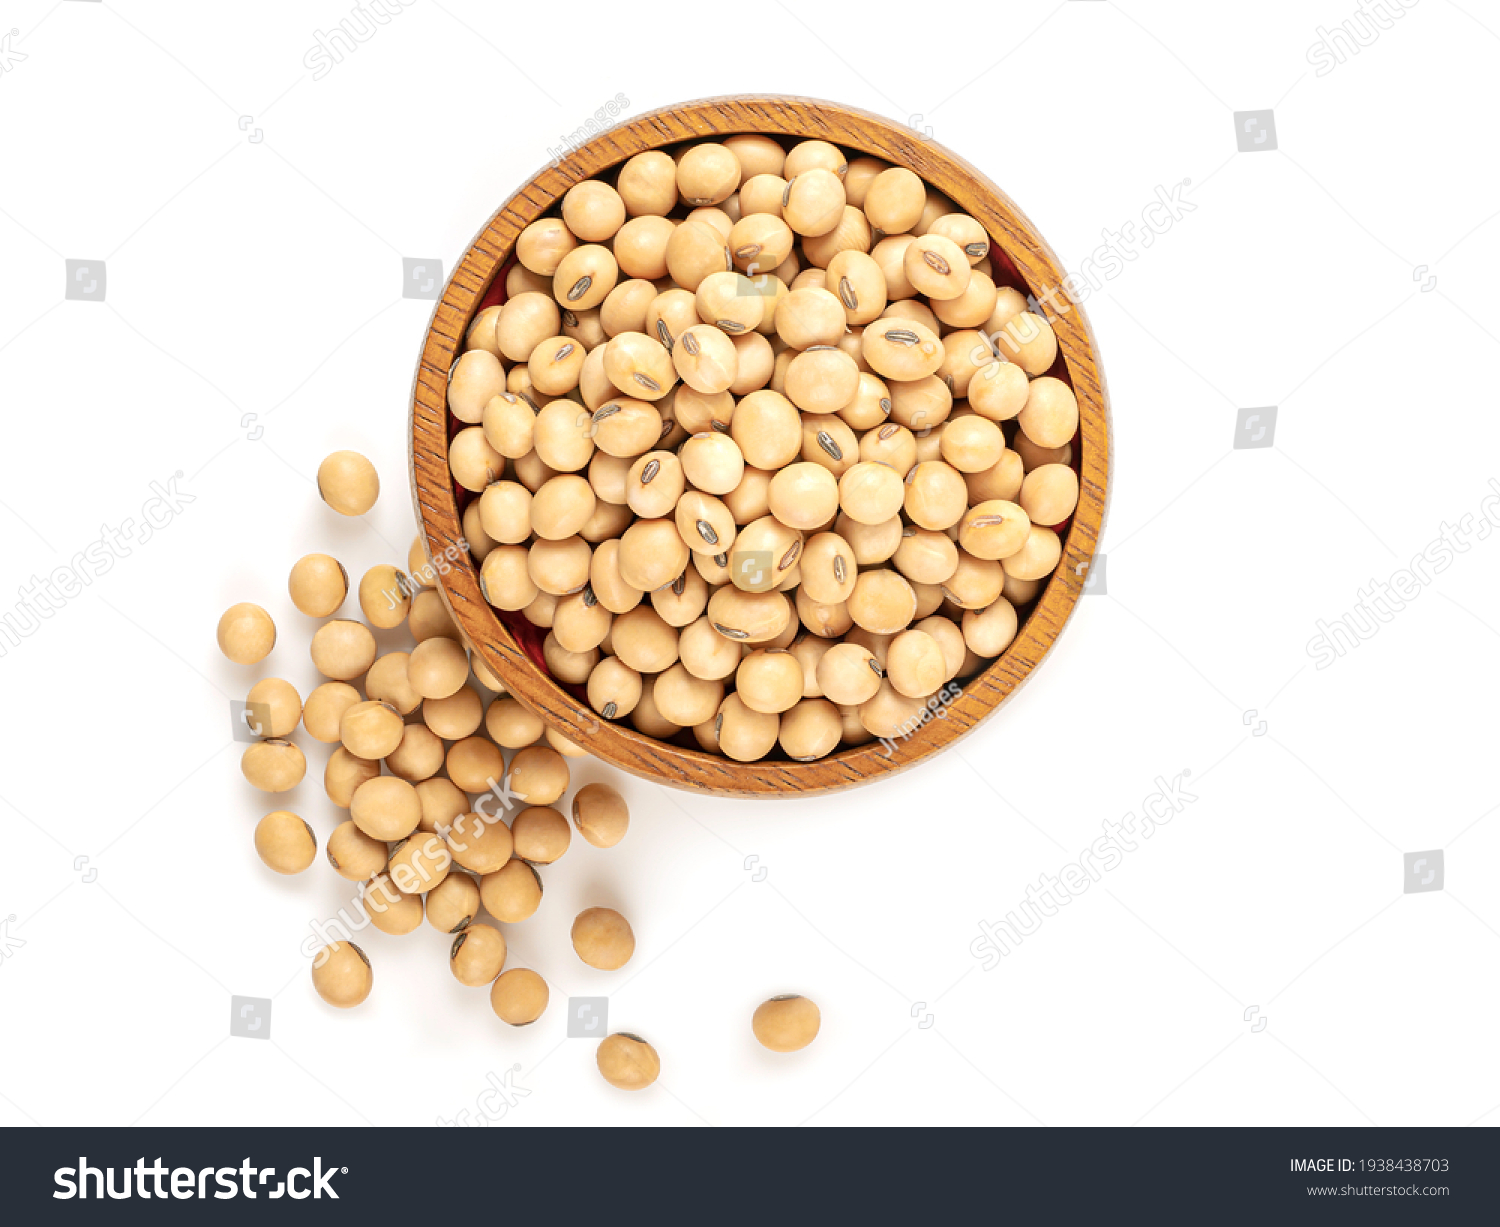 Soy beans seed in wooden bowl isolated on white background. Top view
 #1938438703